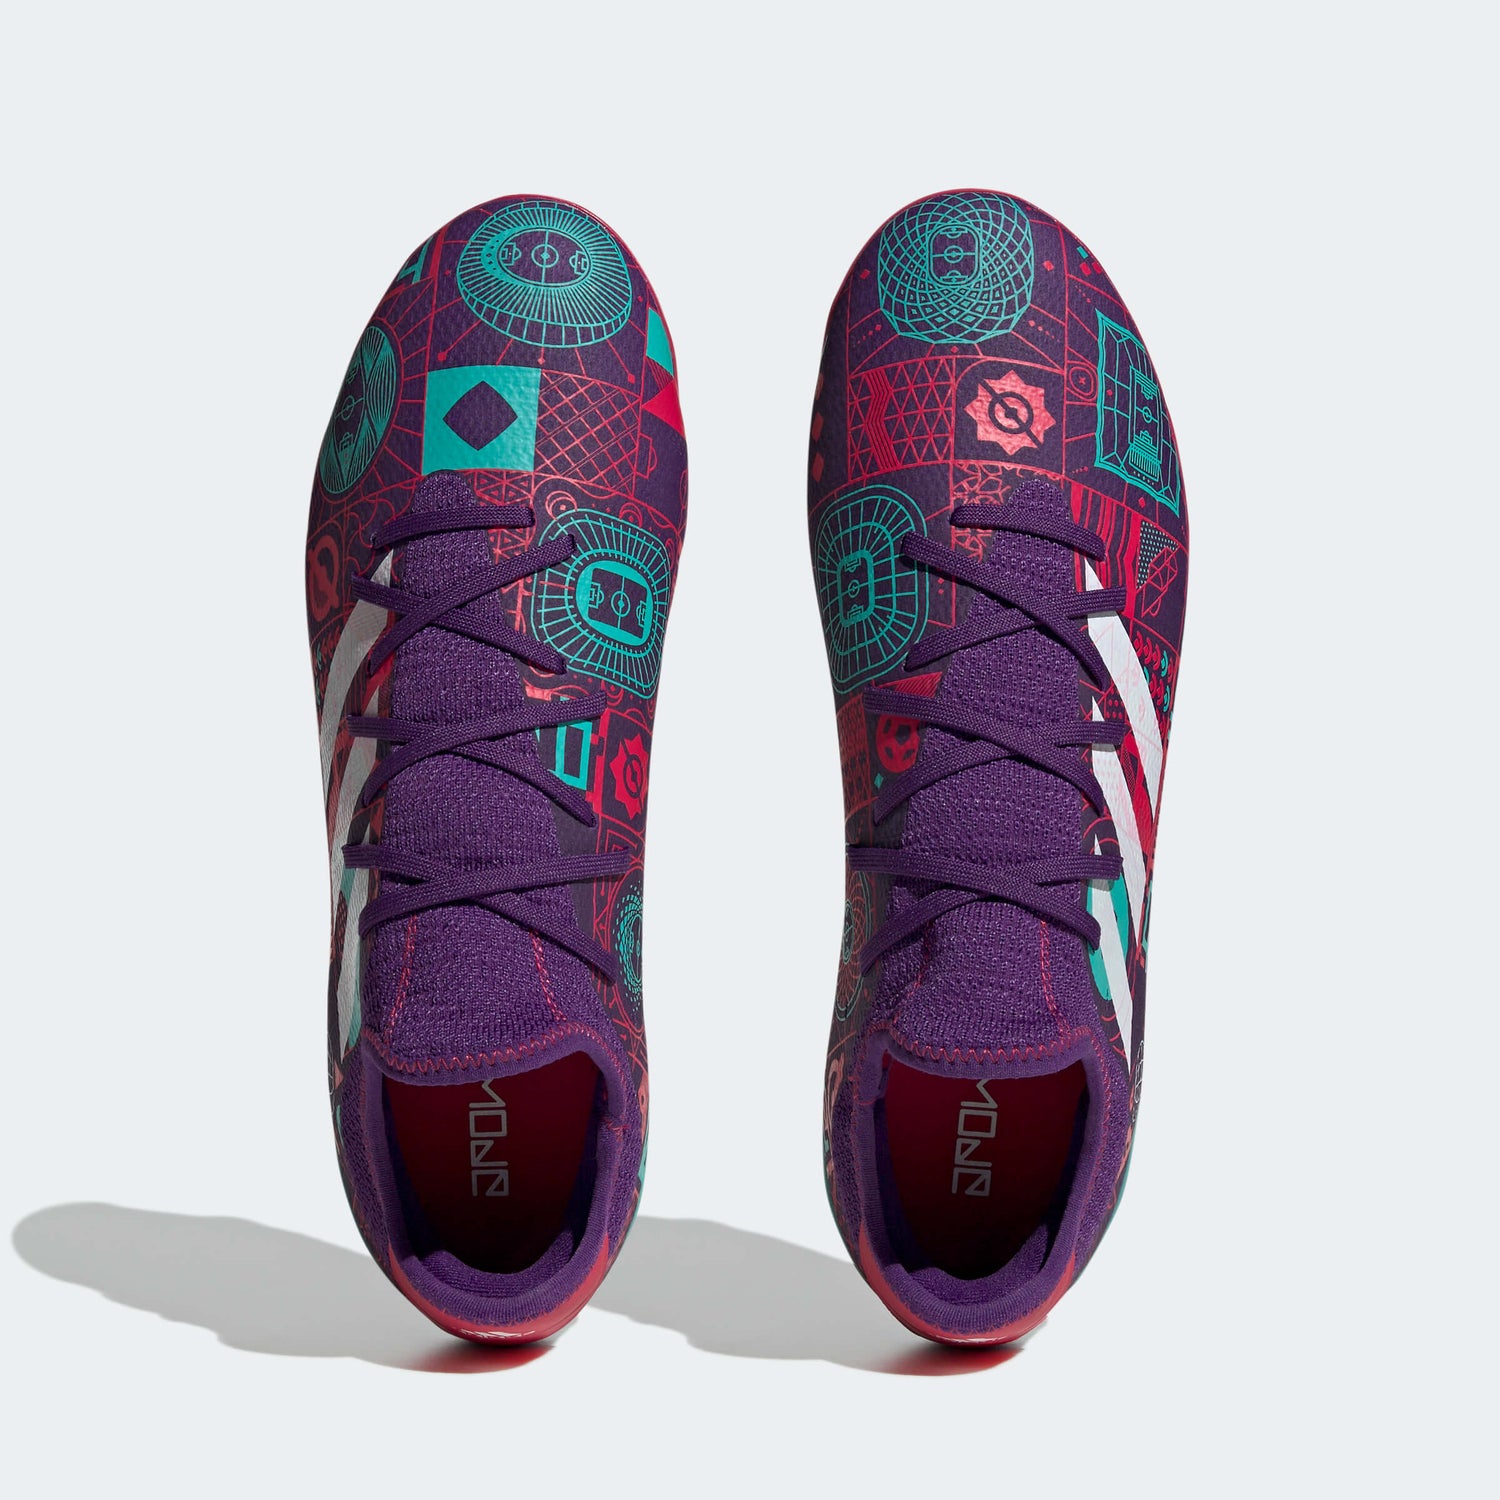 adidas Gamemode Knit FG - Purple-Ruby Red (Pair - Top)